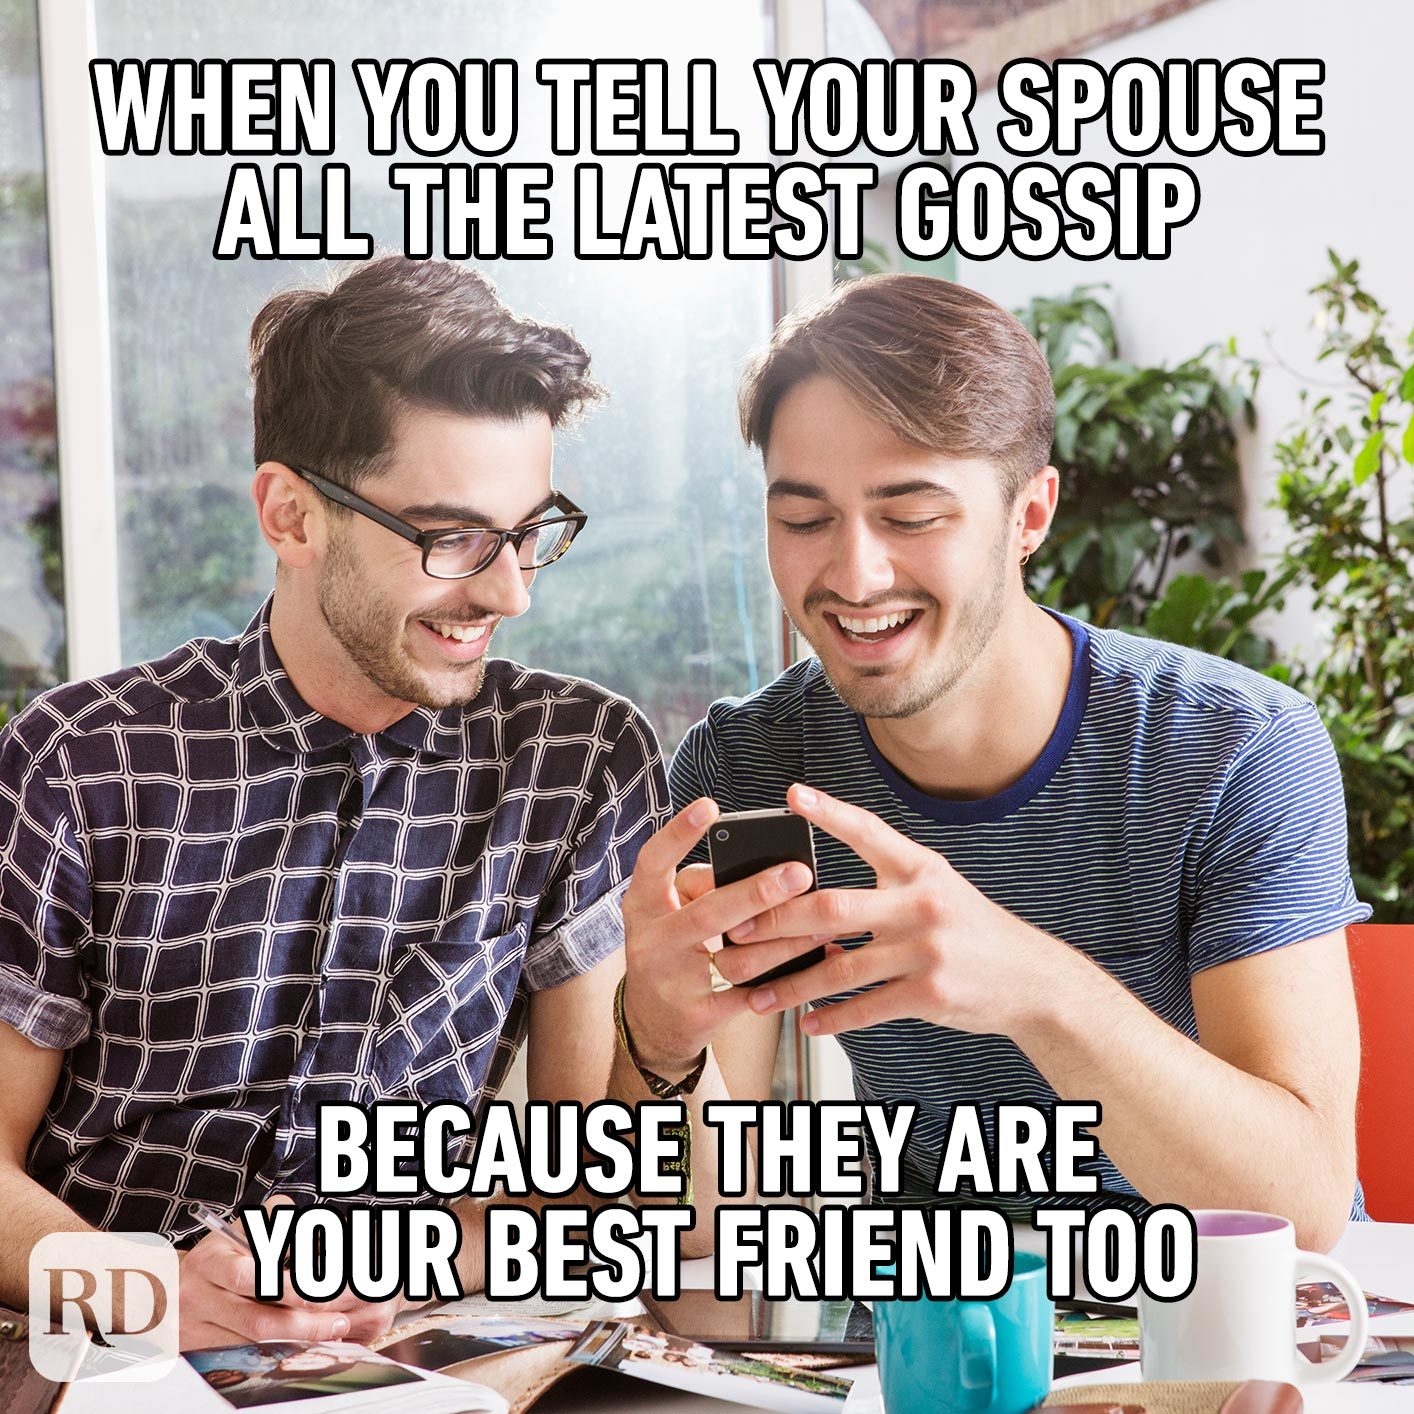 Two men laughing at phones. Meme text: When you tell your spouse all the latest gossip because they are your best friend too